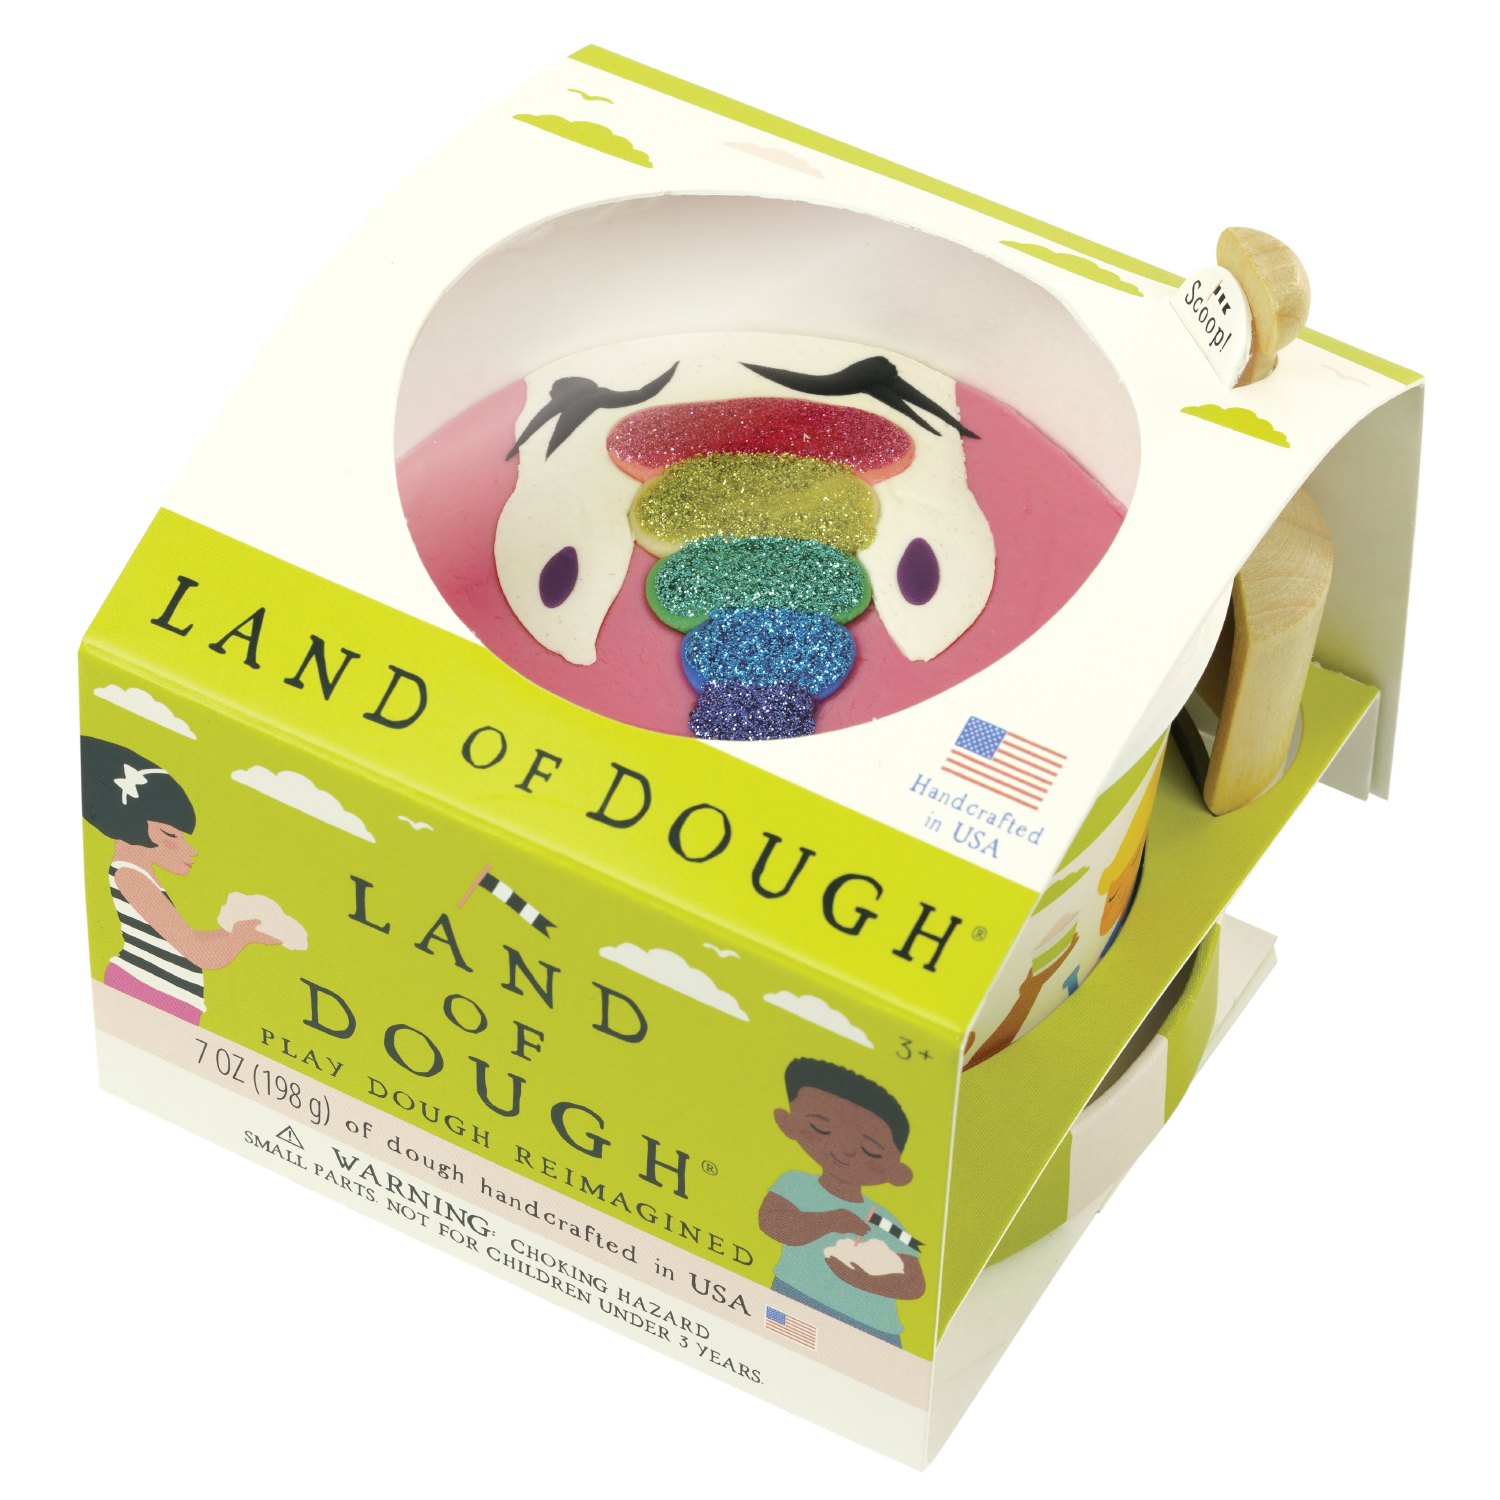 crazy aarons thinking putty unicorn horn / Land of Dough® is made of all-natural dough and colors, compostable glitters, and calming essential oils in eco-friendly packaging. Dough can air dry for keeping sculptures or refreshed for continued play with a damp paper towel and covered with a lid.